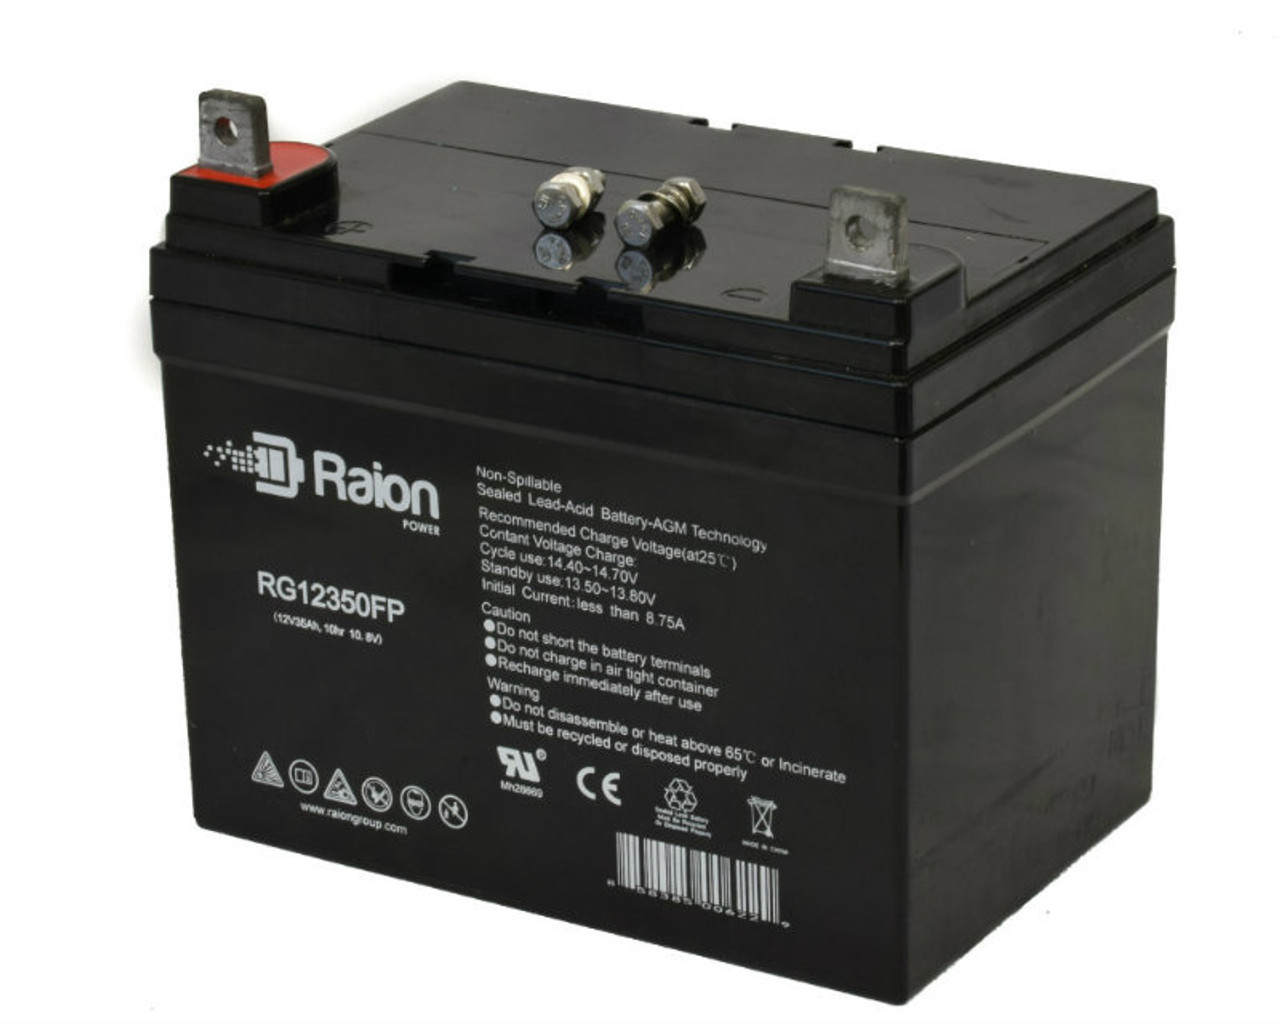 Raion Power Replacement 12V 35Ah RG12350FP Battery for Ingersol Equipment 4014